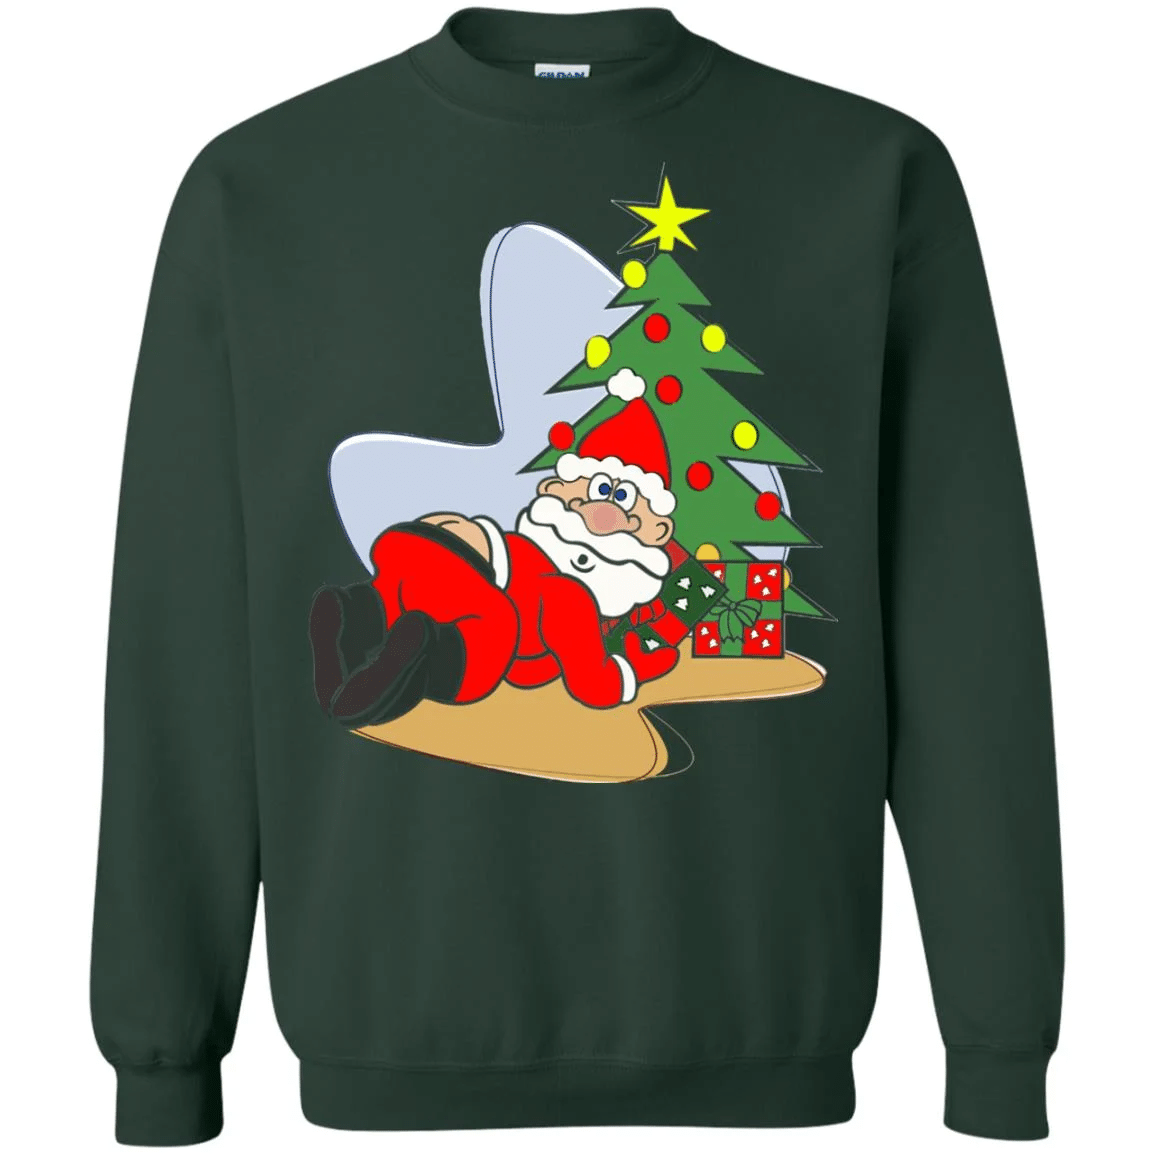 Merry Christmas with Santa Claus gift and Christmas tree Style: Sweatshirt, Color: Forest Green